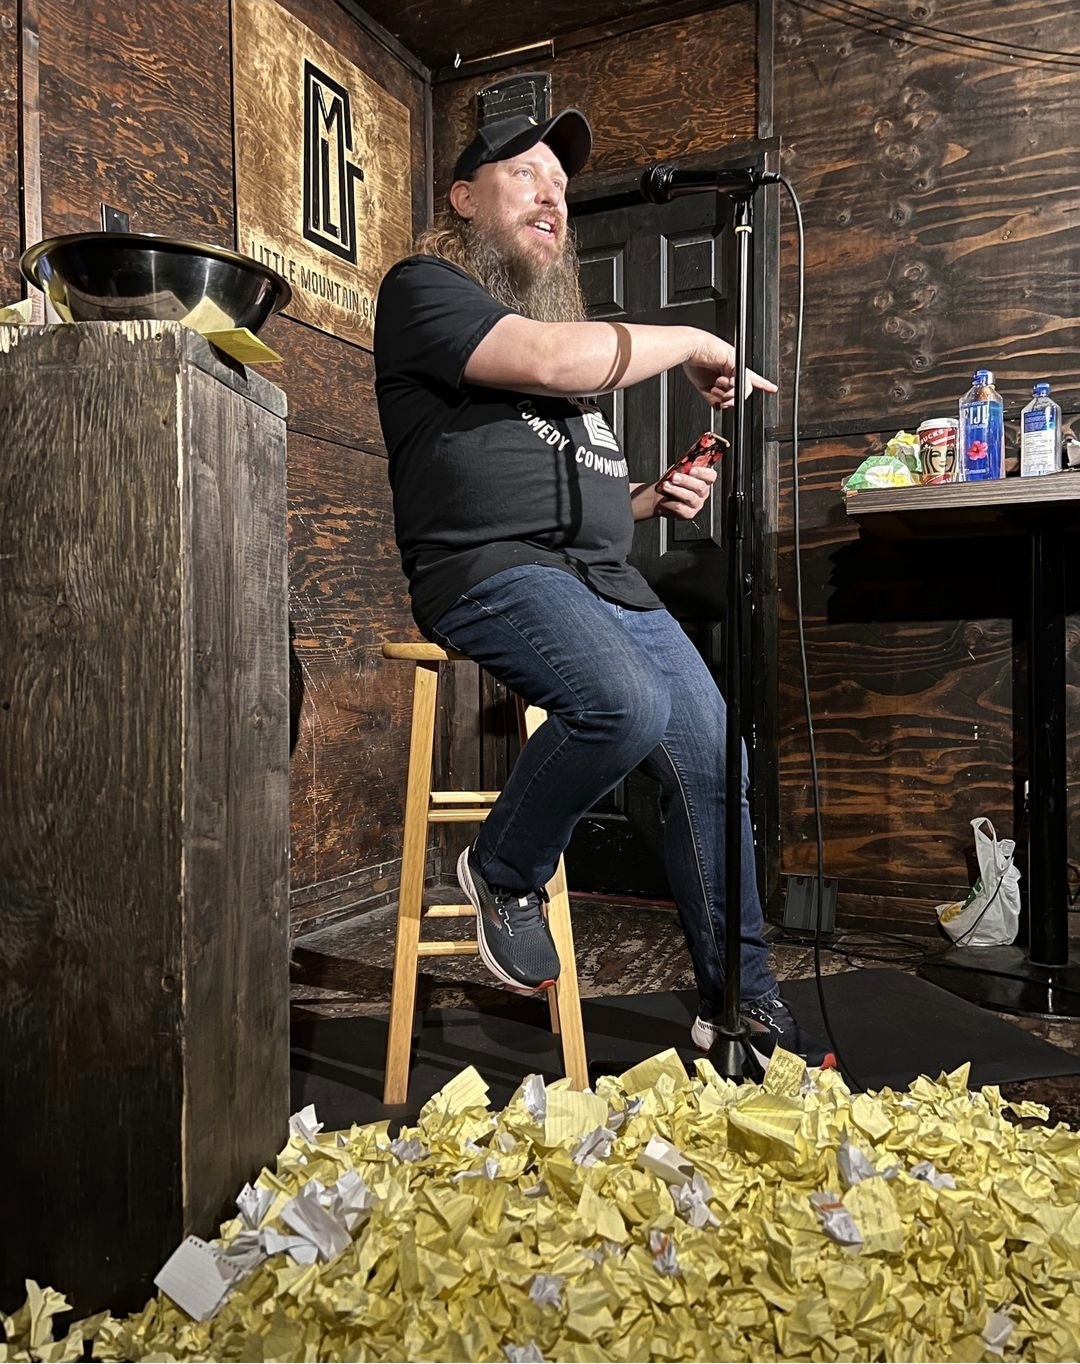 In a dark wood-panelled room, comedian Graham Clark (wearing a Little Mountain Gallery shirt and sporting an impressively long beard) addresses an unseen audience. A large pile of crumpled white and yellow notepapers is at his feet.